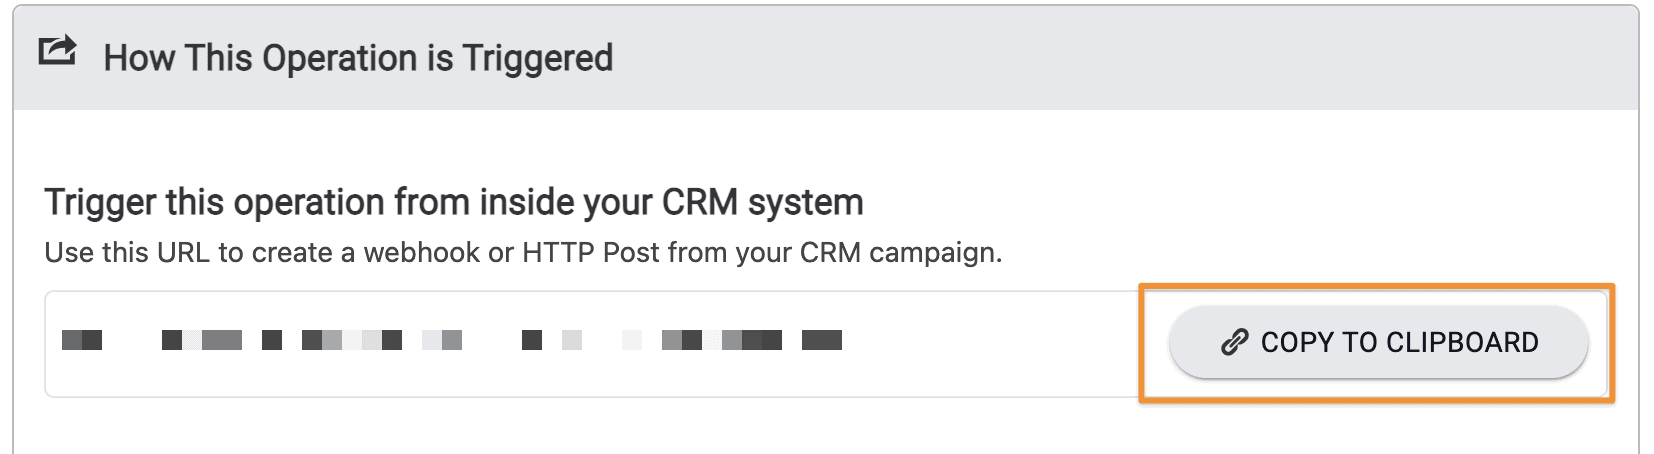 Screenshot showing where to copy the URL to trigger from inside your CRM